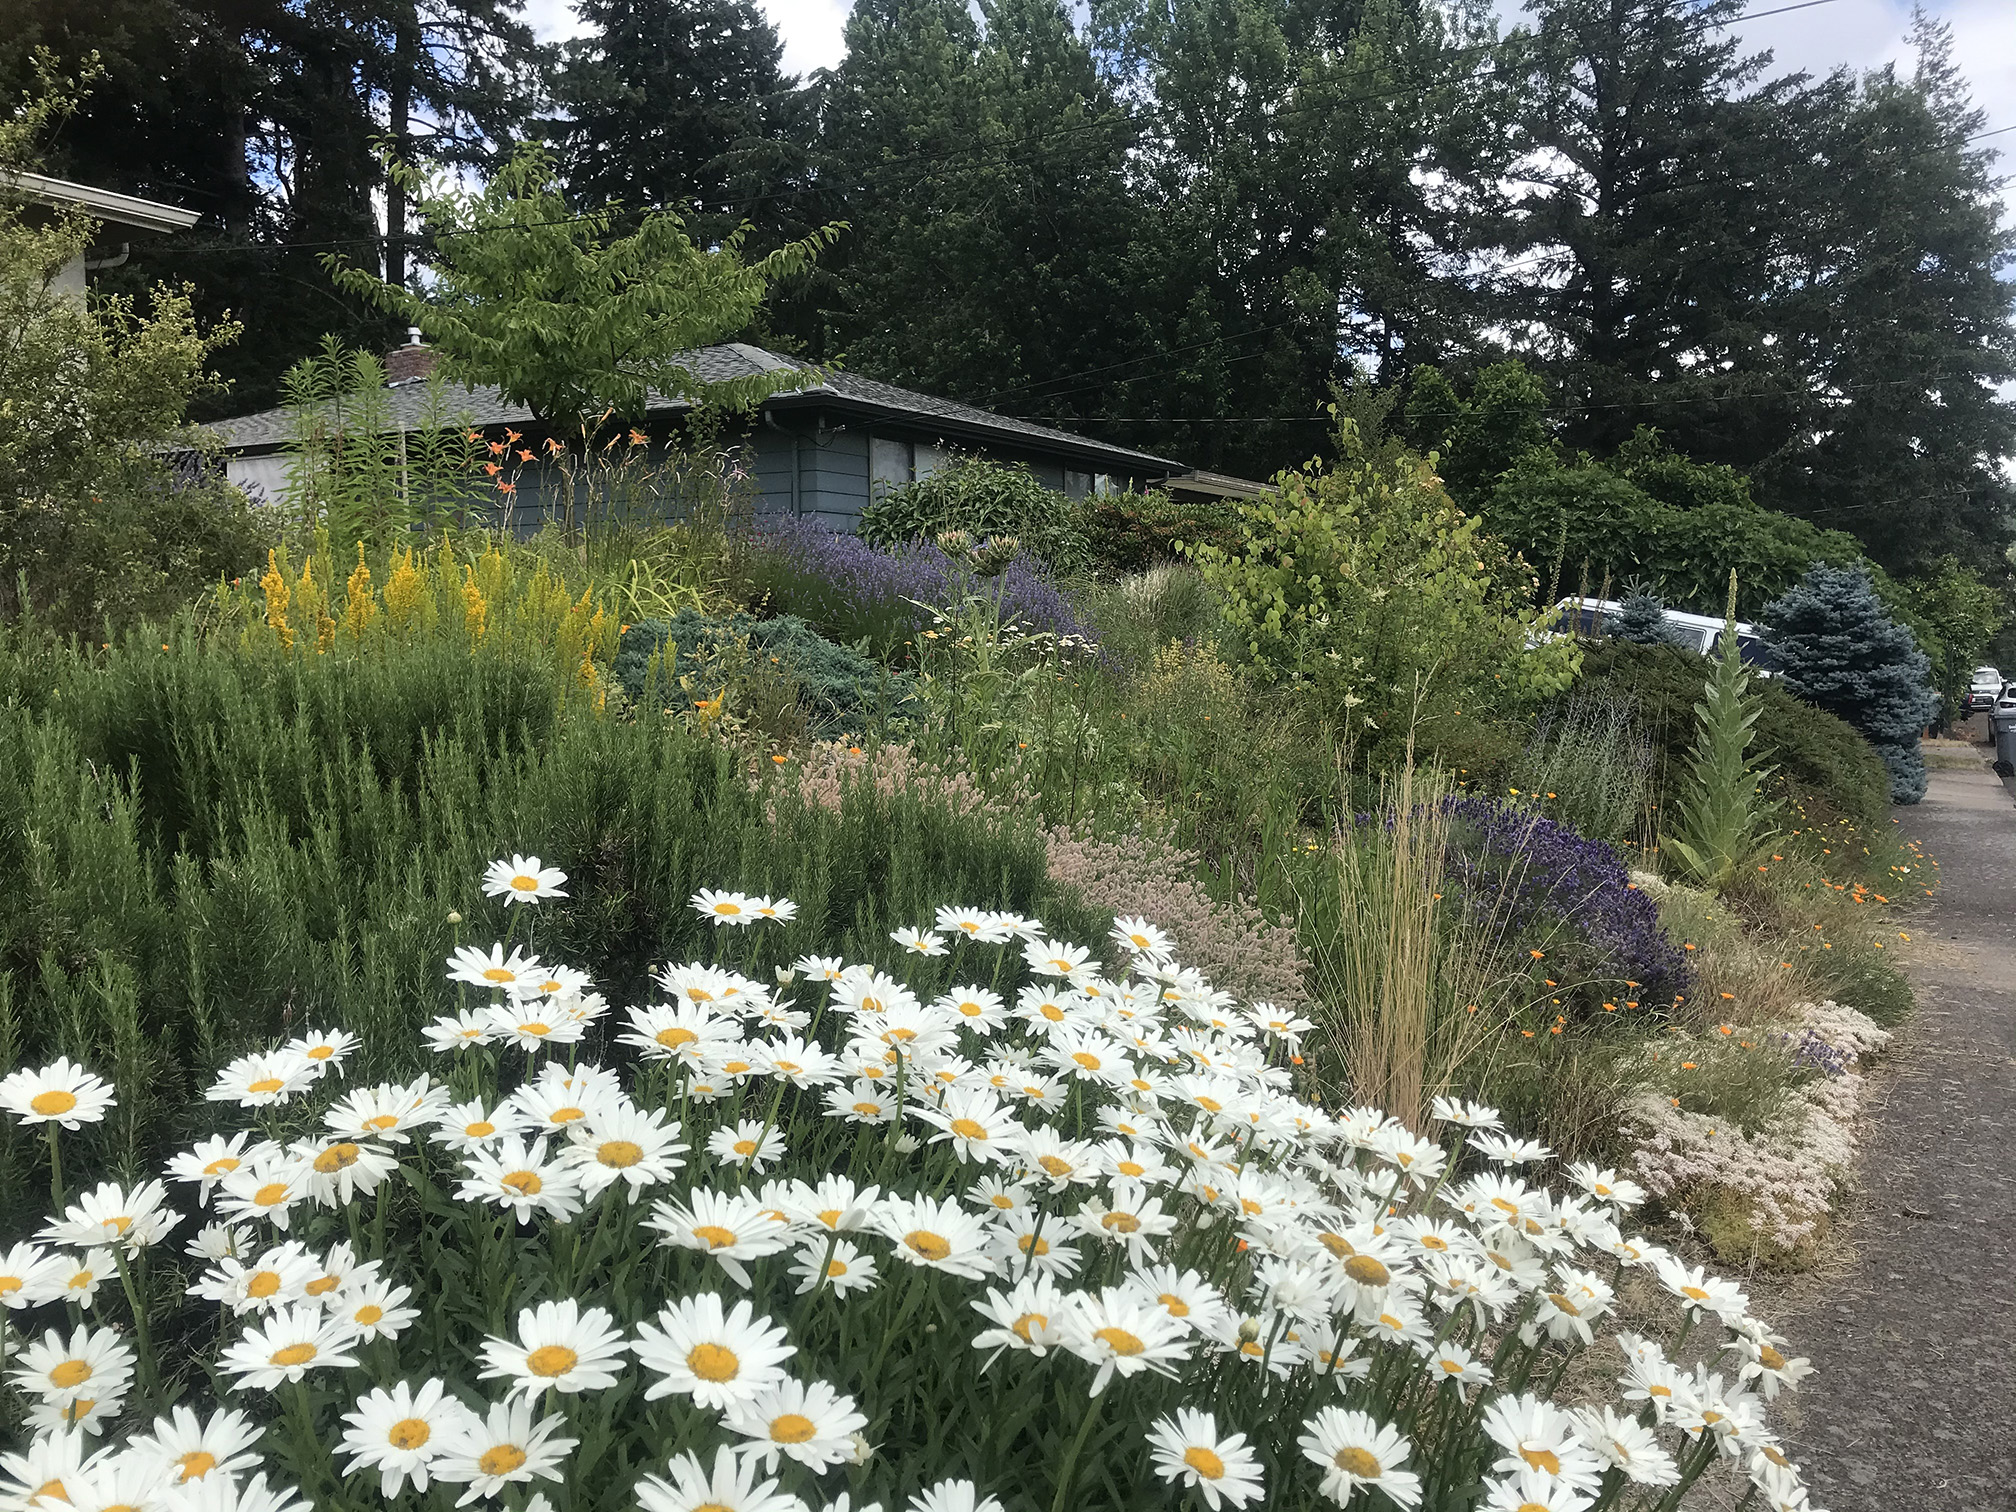 A urban garden full of flowers. In the foreground are daisies, with white petals around a yellow center. Beyond those are yellow goldenrod and purple of English lavender,